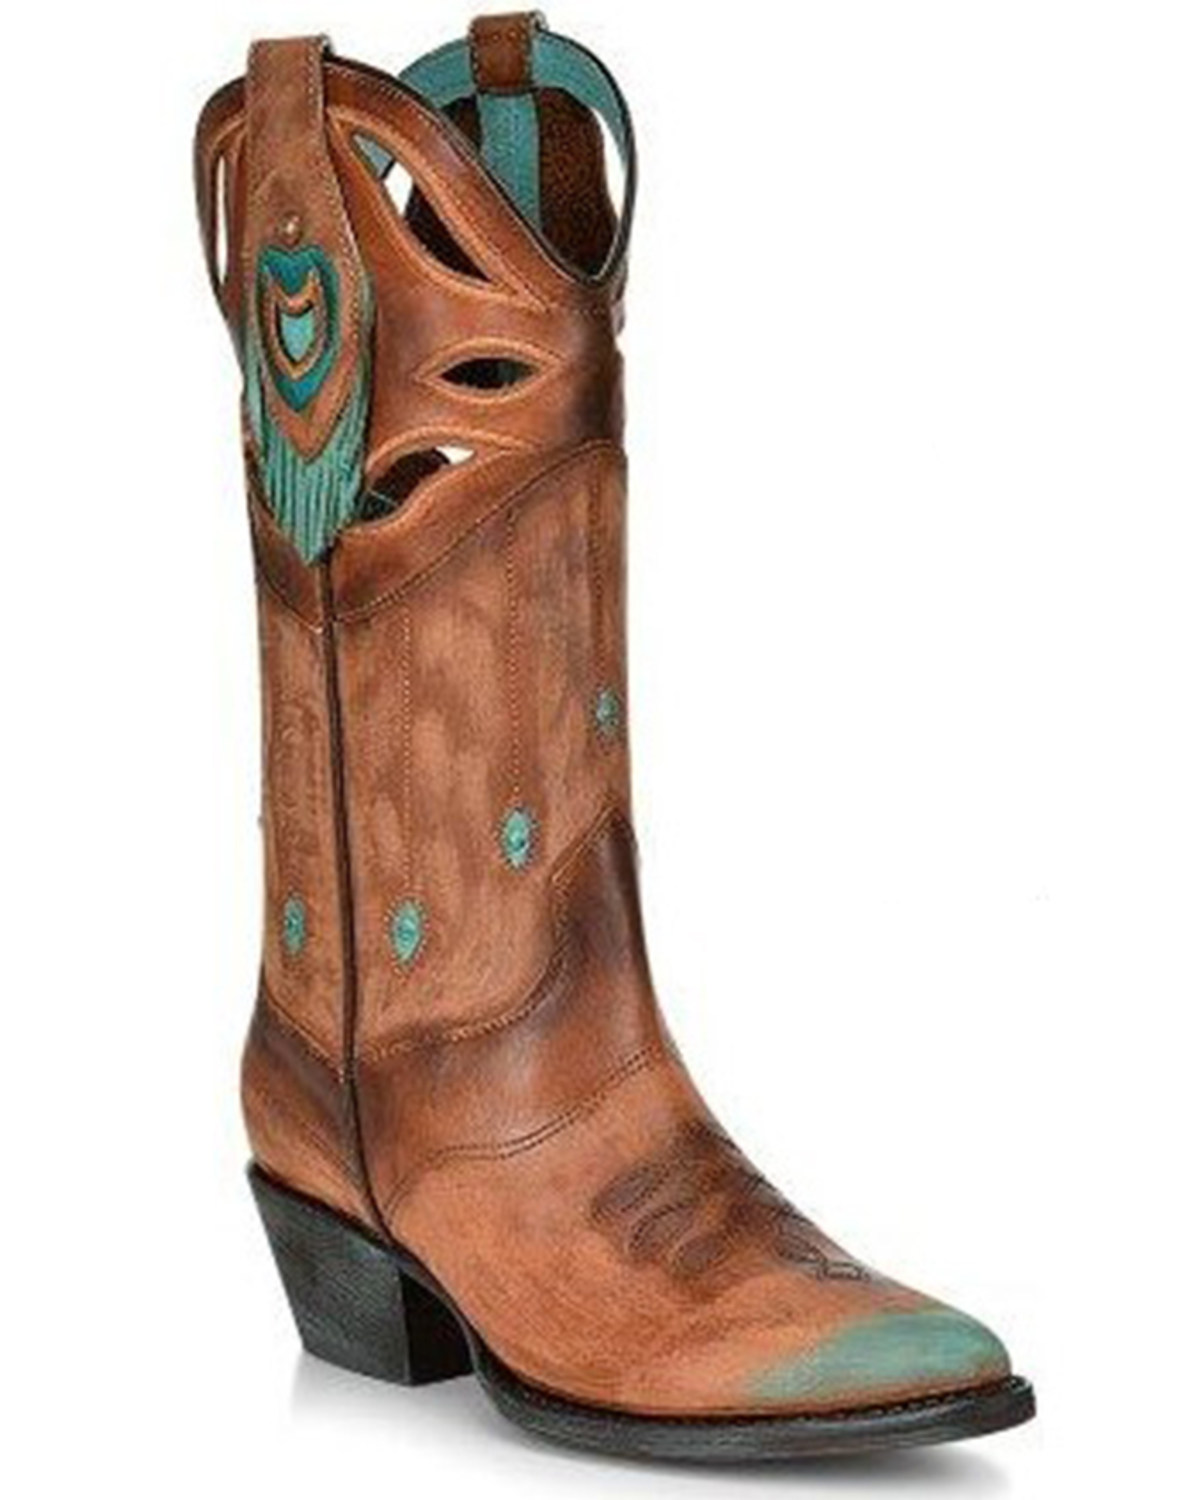 Corral Women's Fringe Western Boots - Pointed Toe